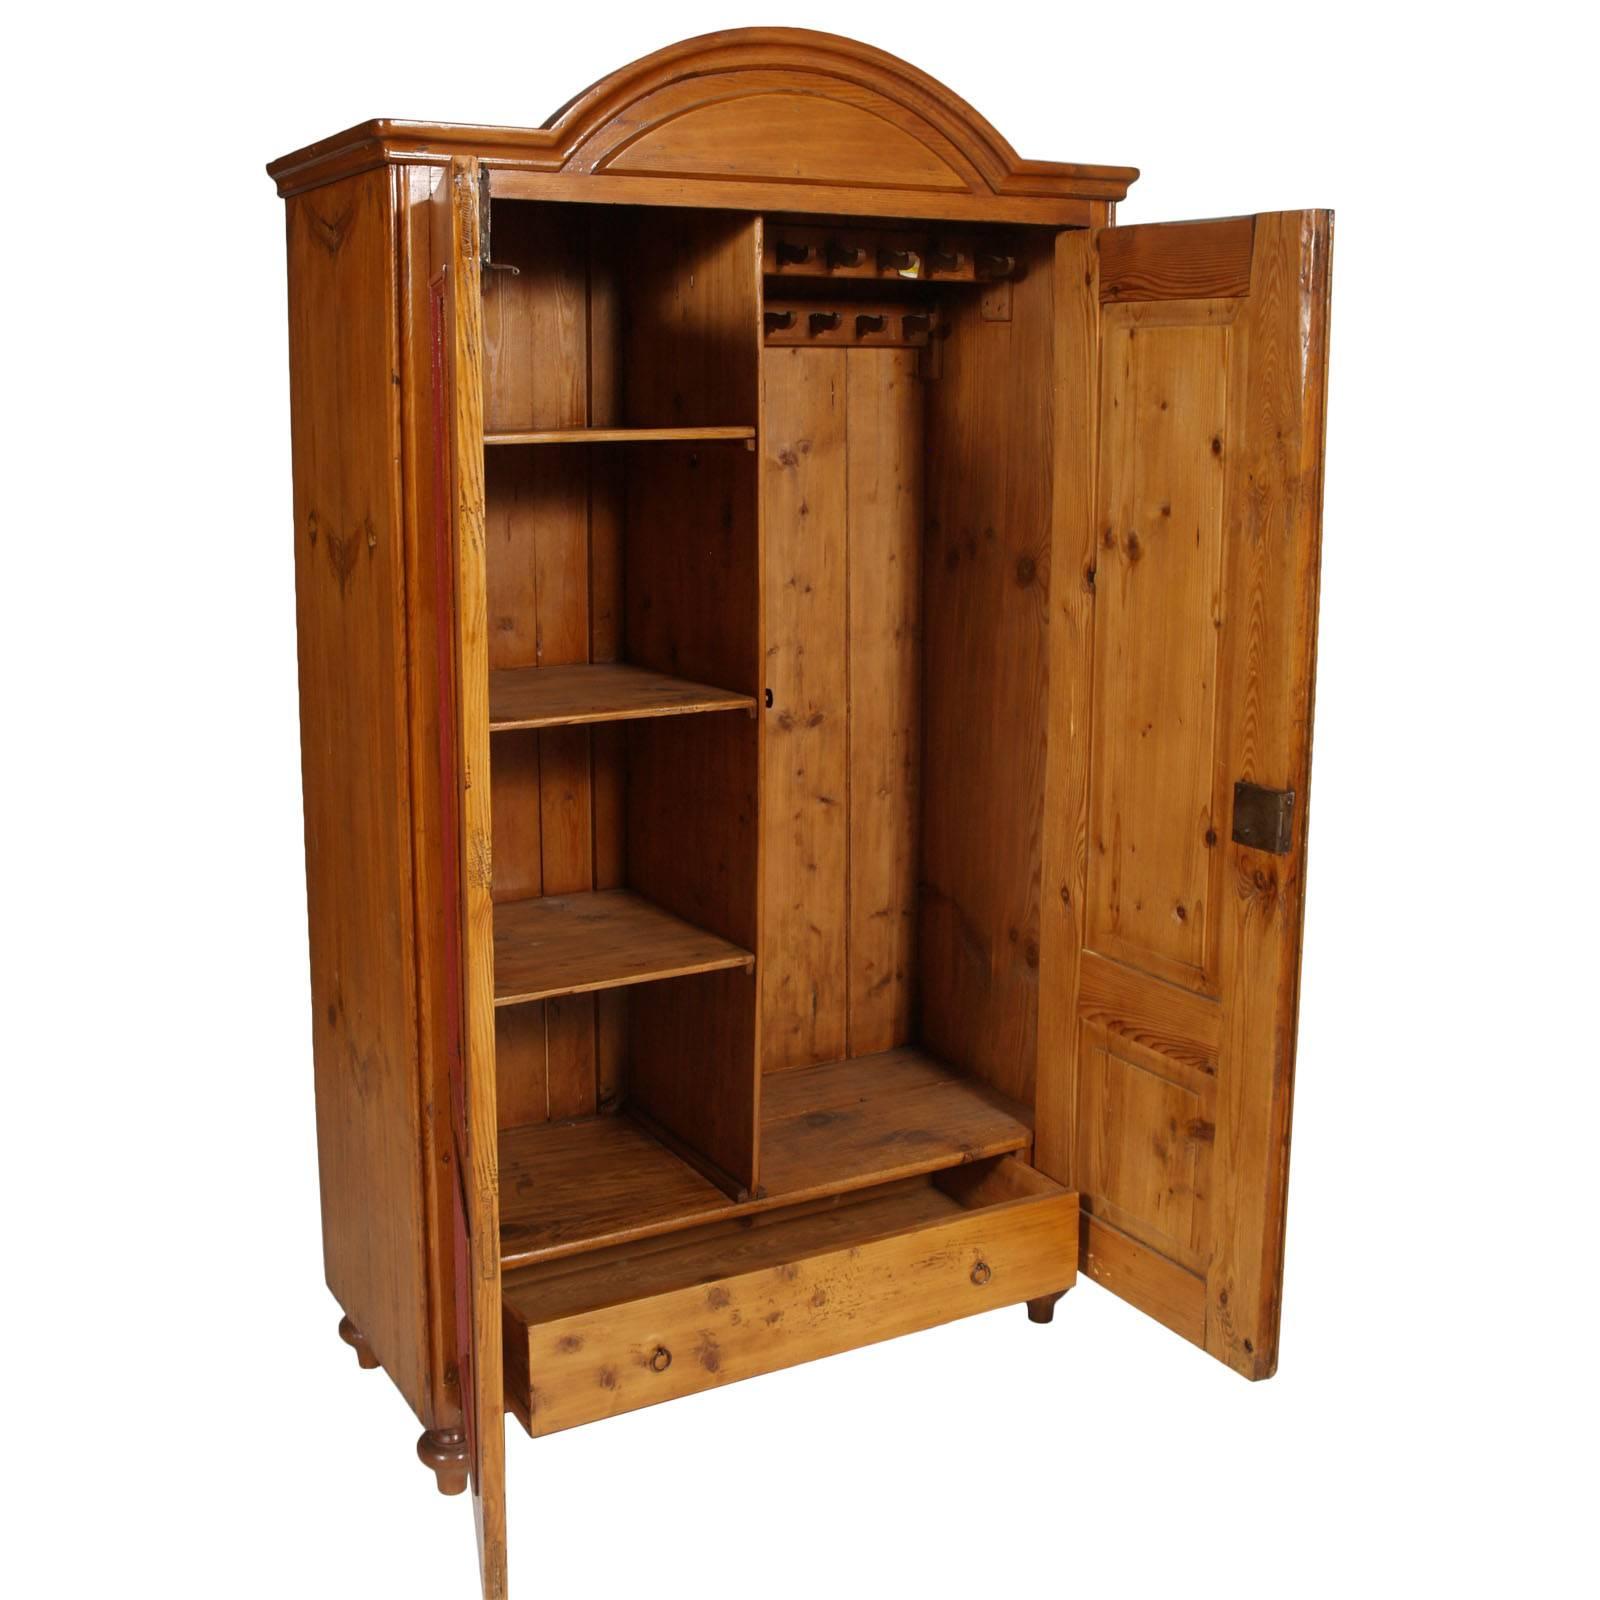 Austrian 1860s wardrobe cabinet cupboard all original, in solid wood with dresser, restored polished to wax

Measures cm: H 195, W 115, D 52.